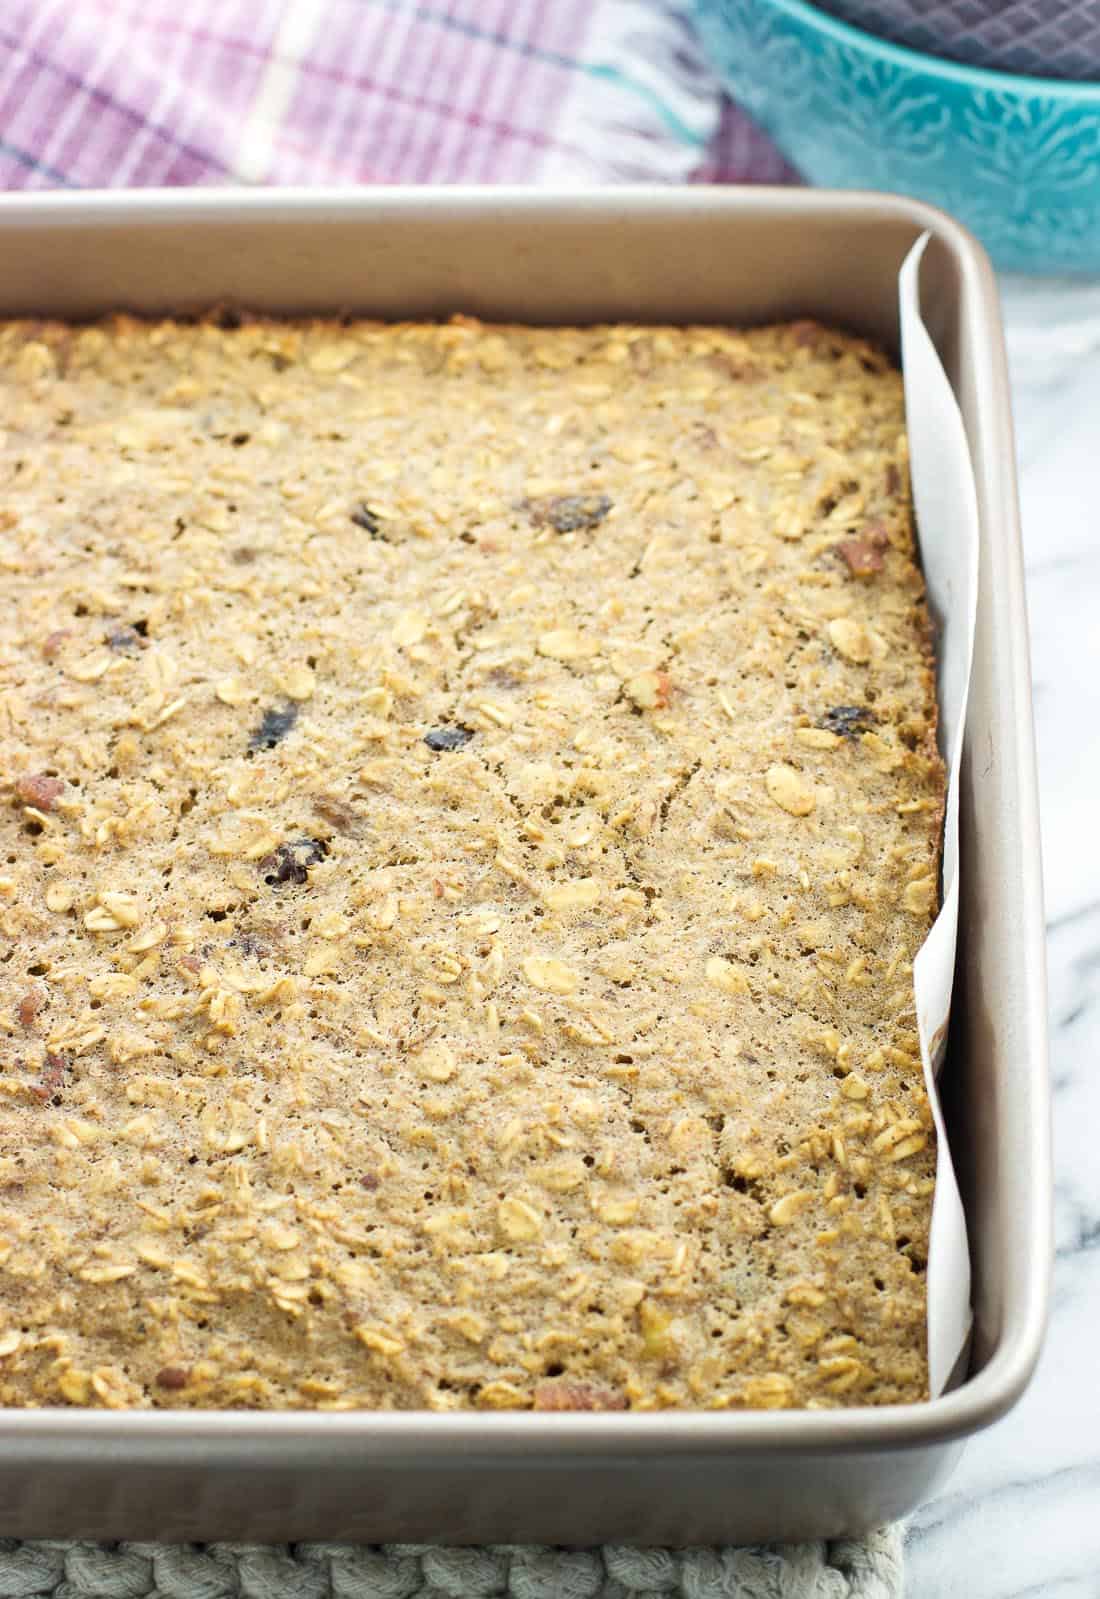 Baked oatmeal in a parchment-lined square pan.